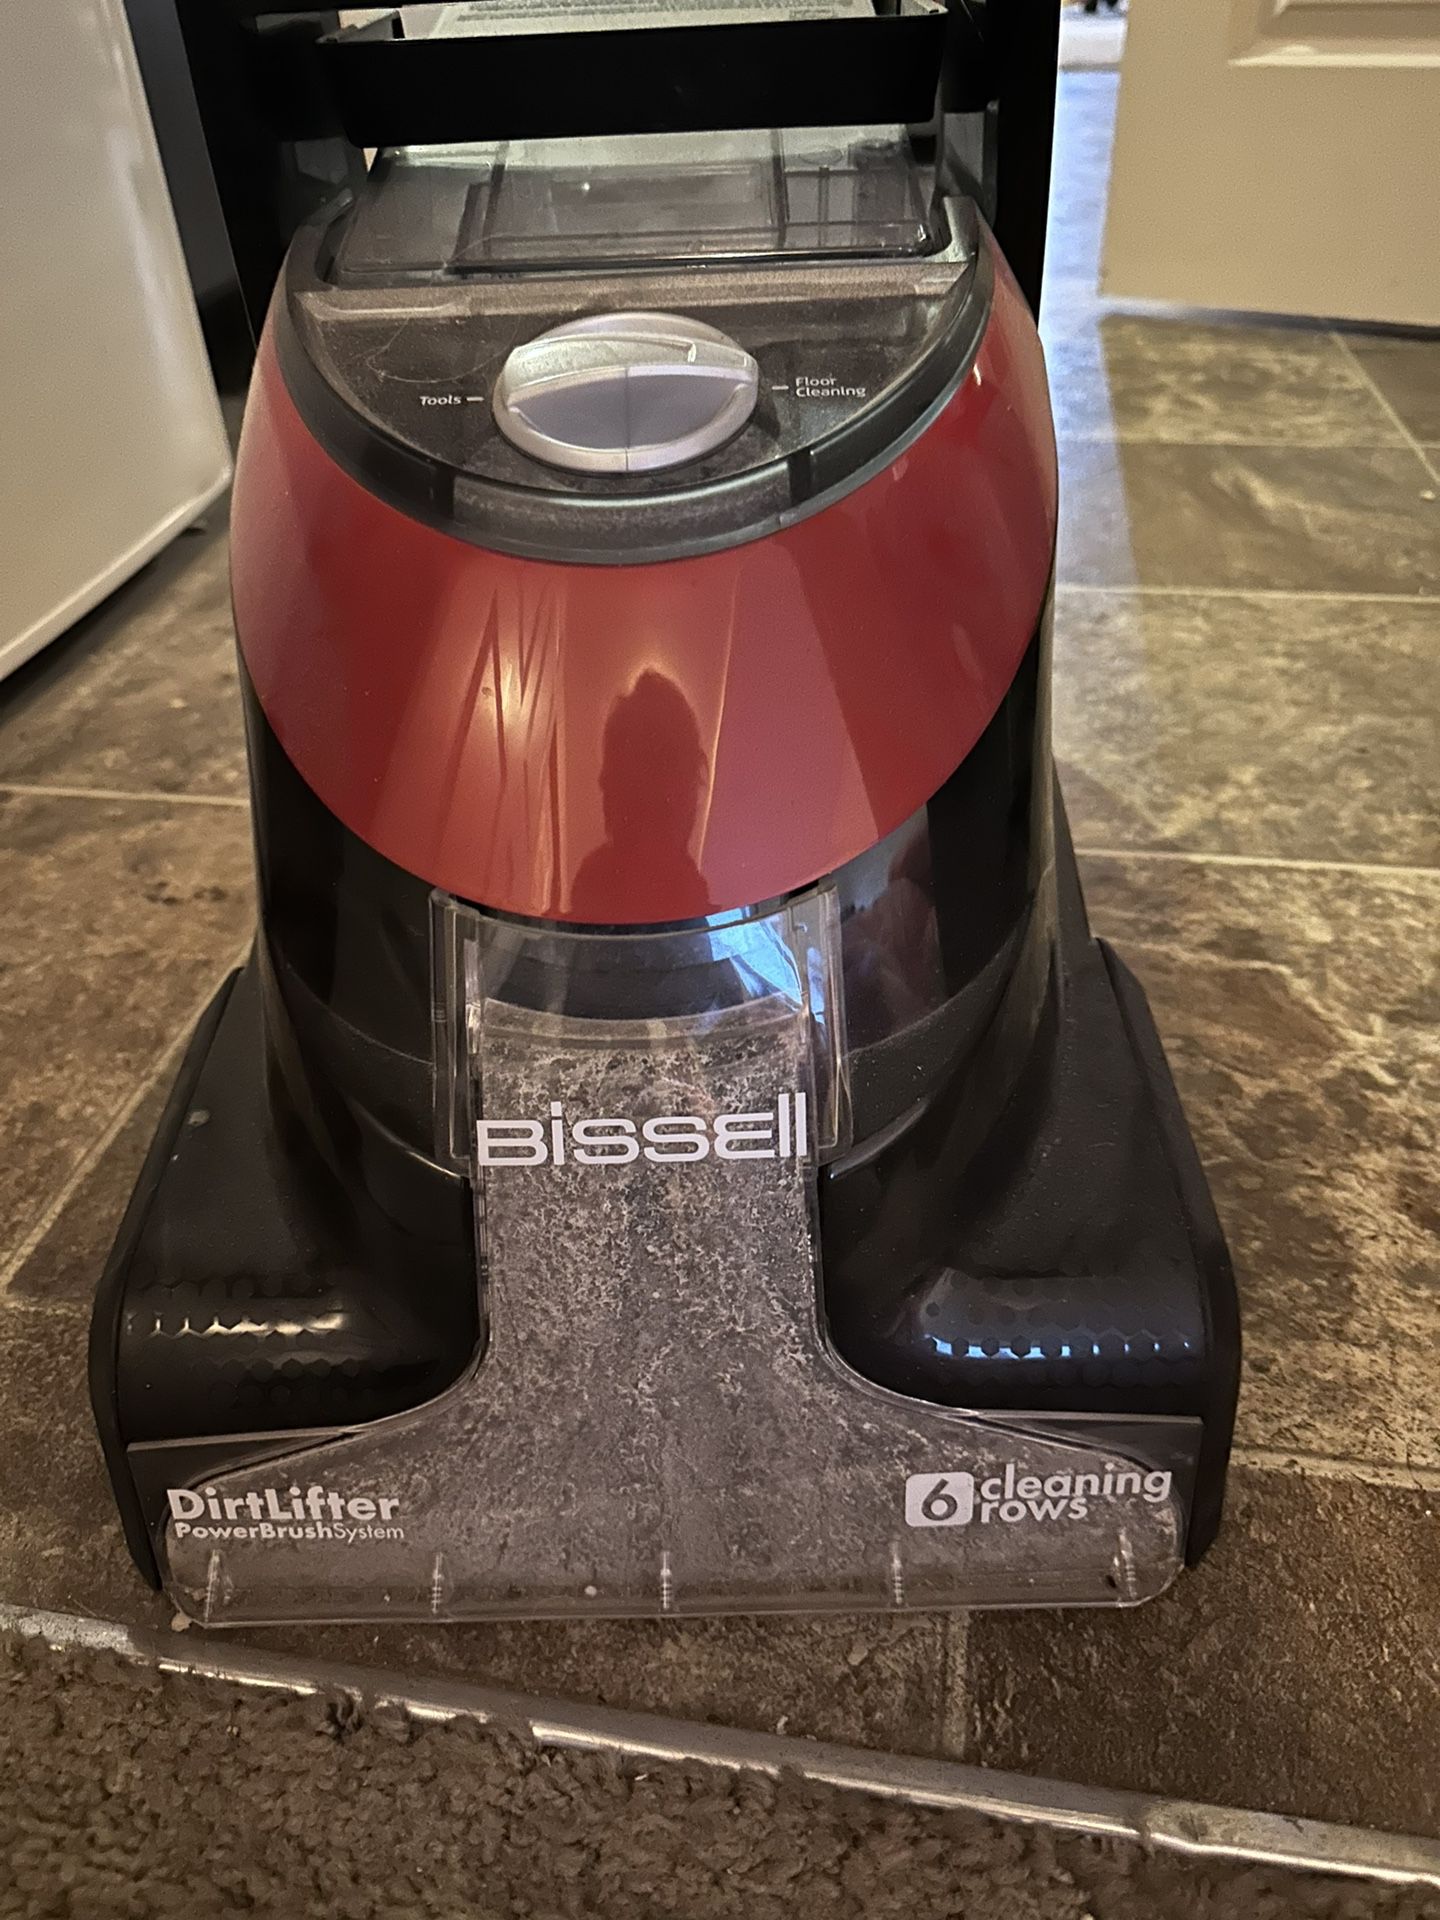 Bissell Dirtlifter Power Brush Cleaner